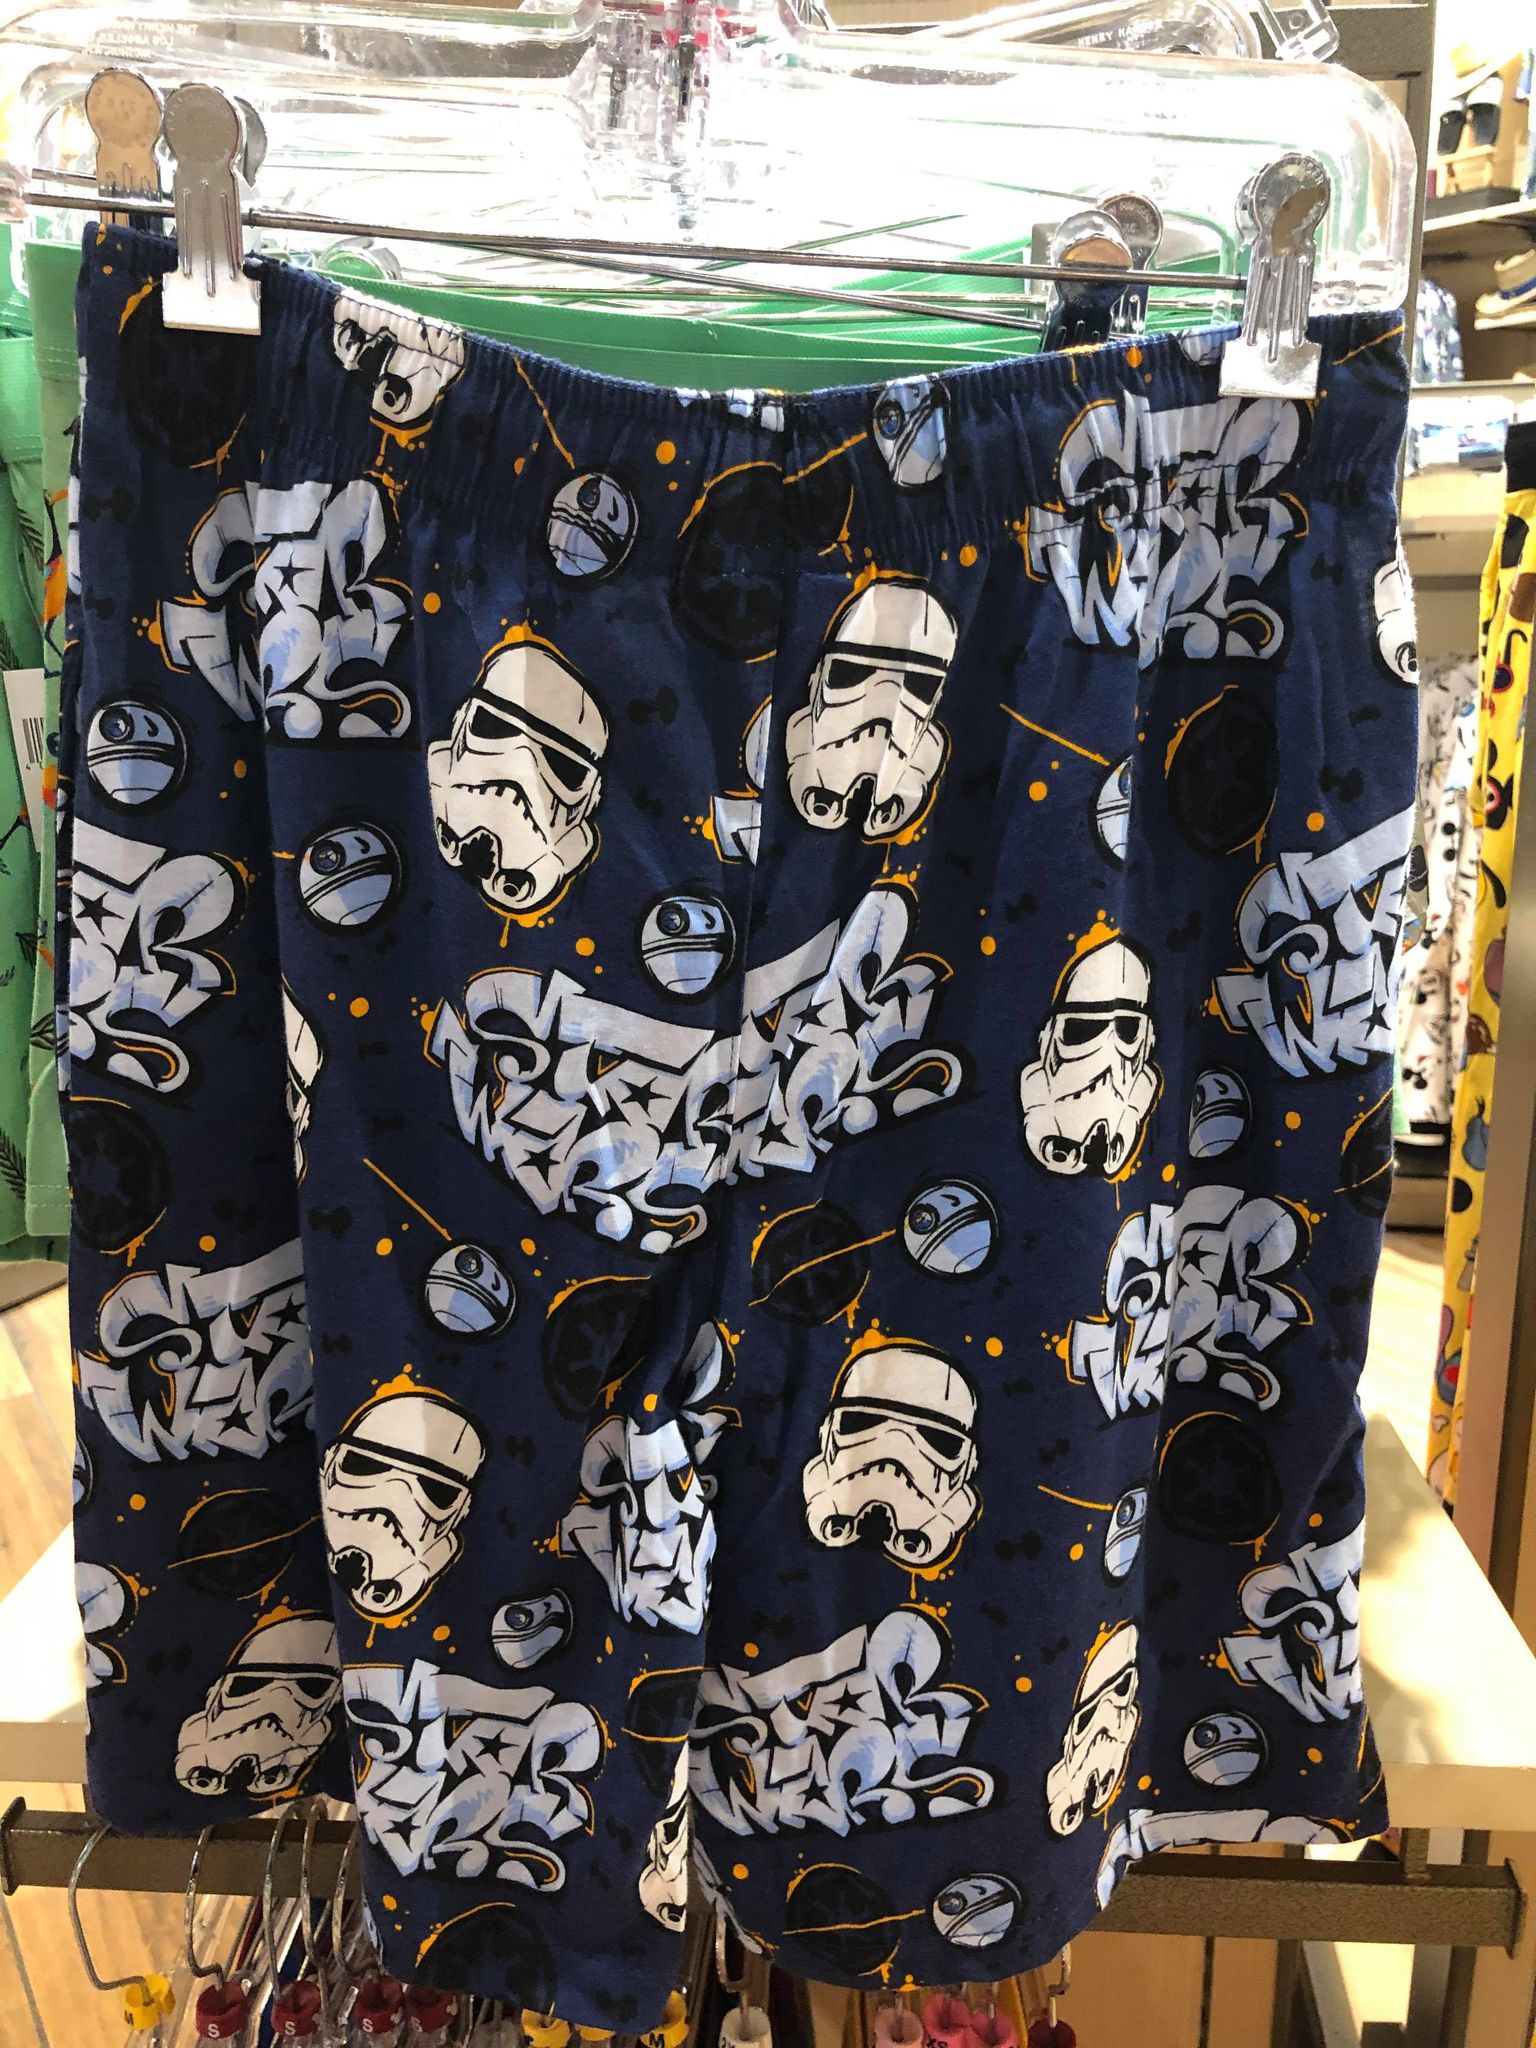 New Men’s Pajamas and Boxers Spotted at Disney World! - clothes